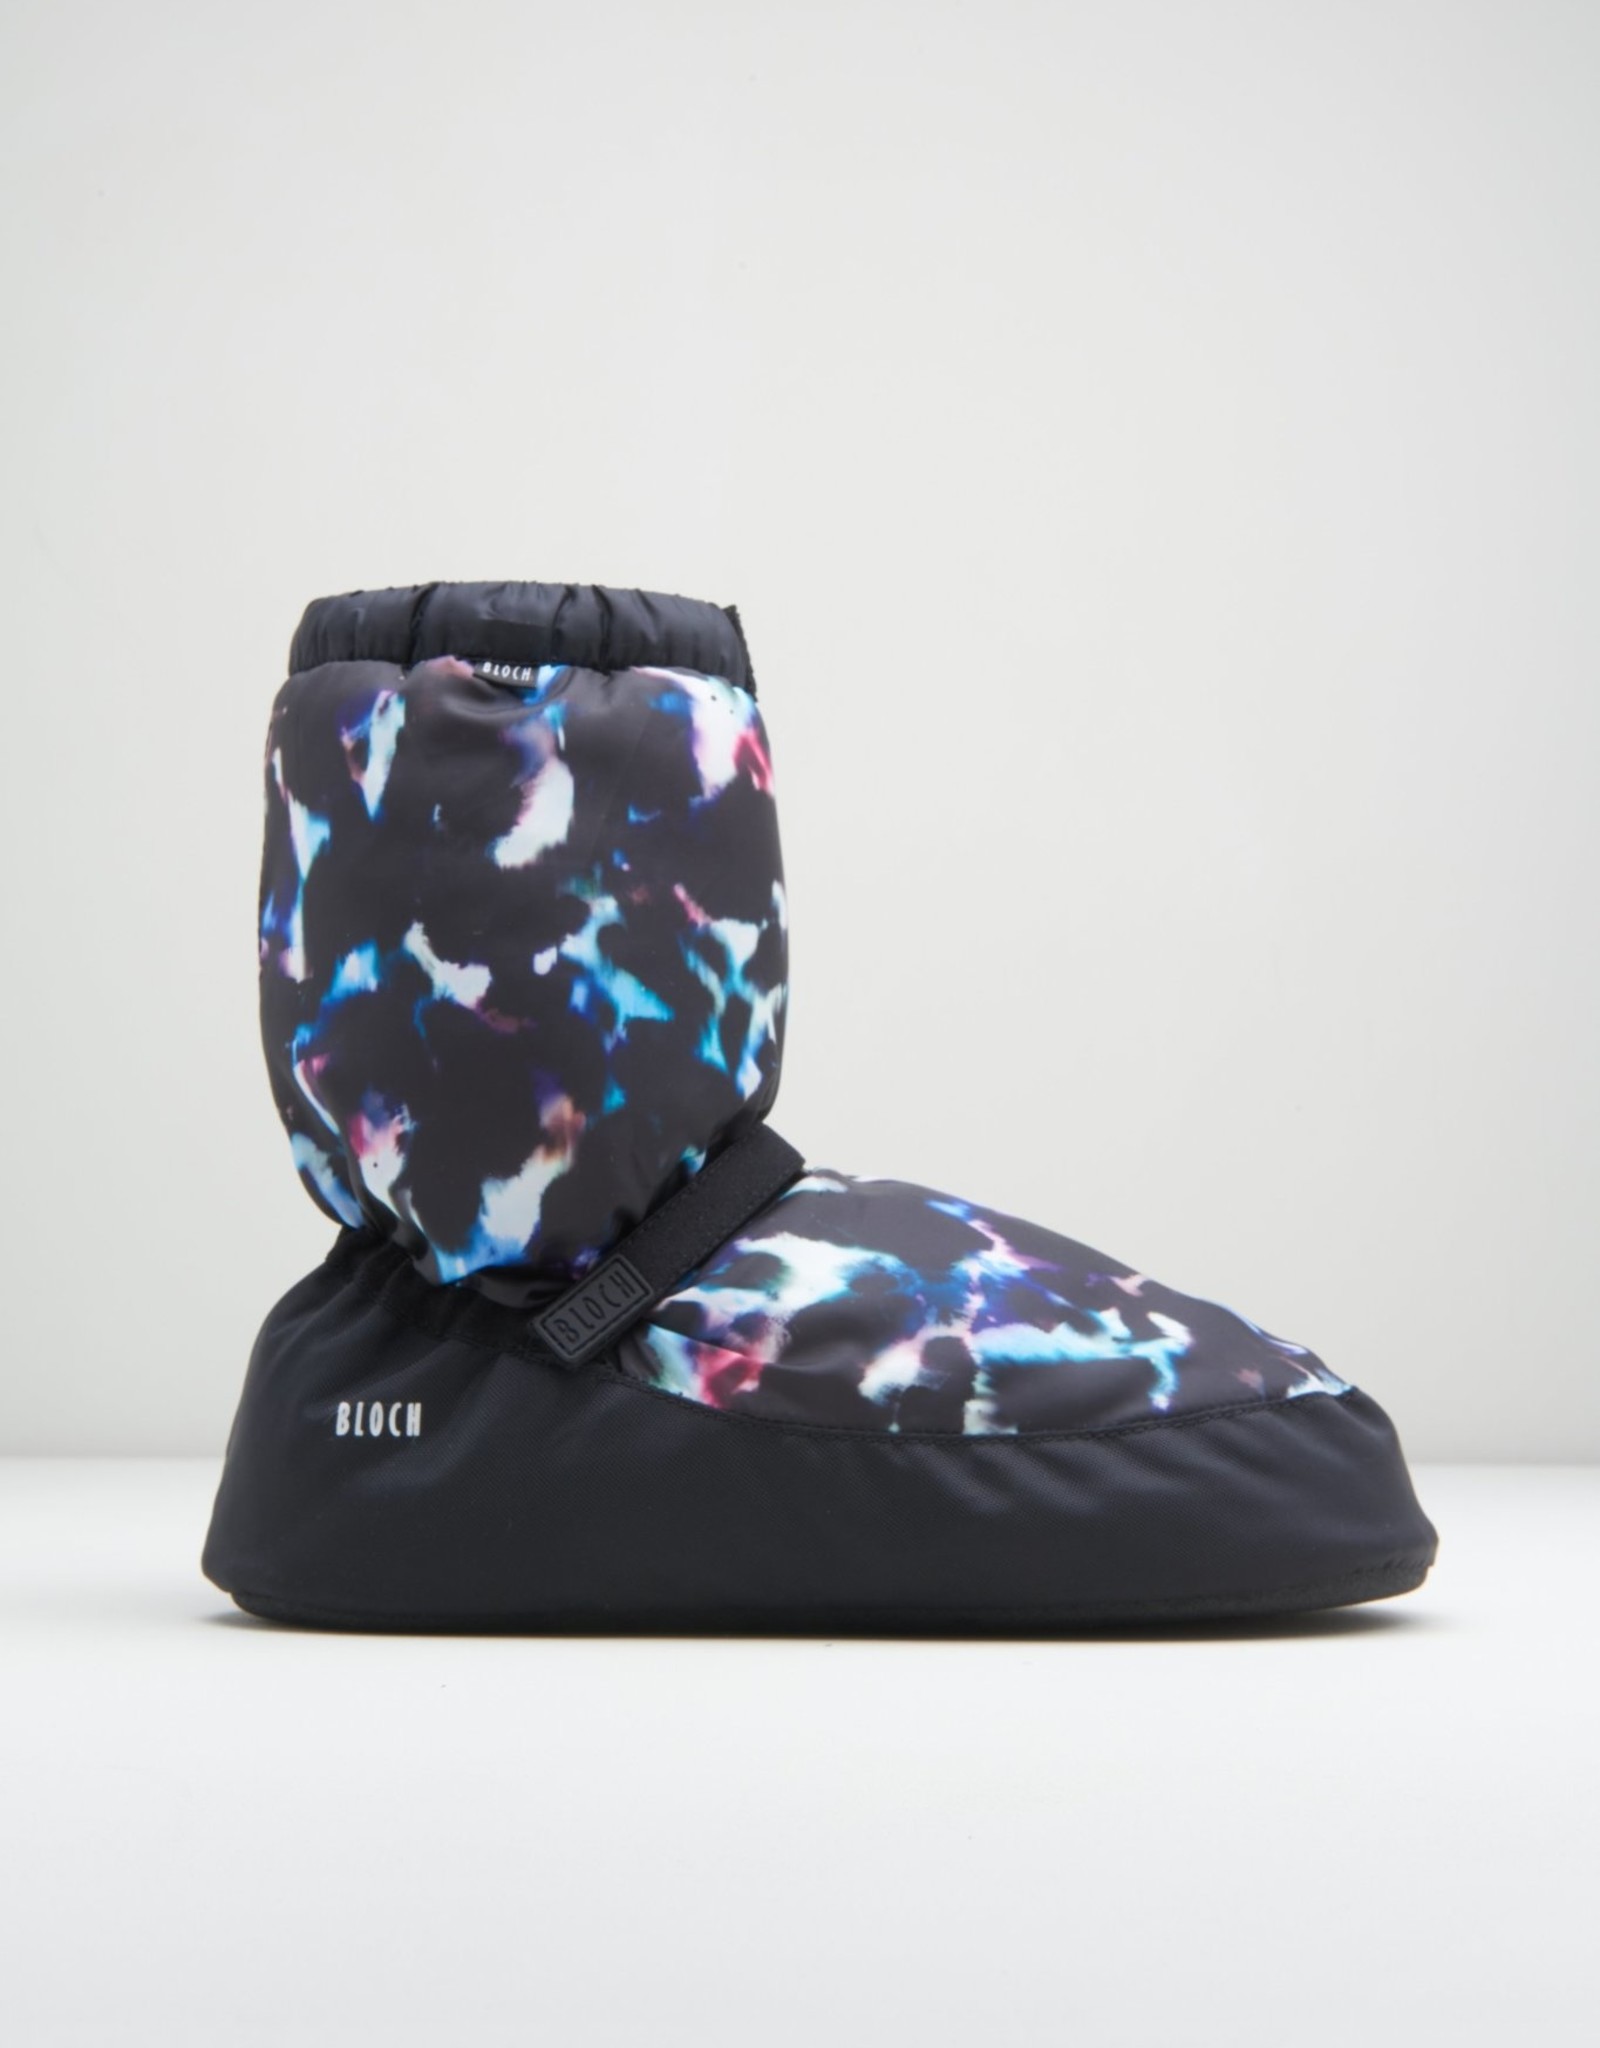 Bloch IM009P Warm Up Booties in NEW Limited Edition Prints